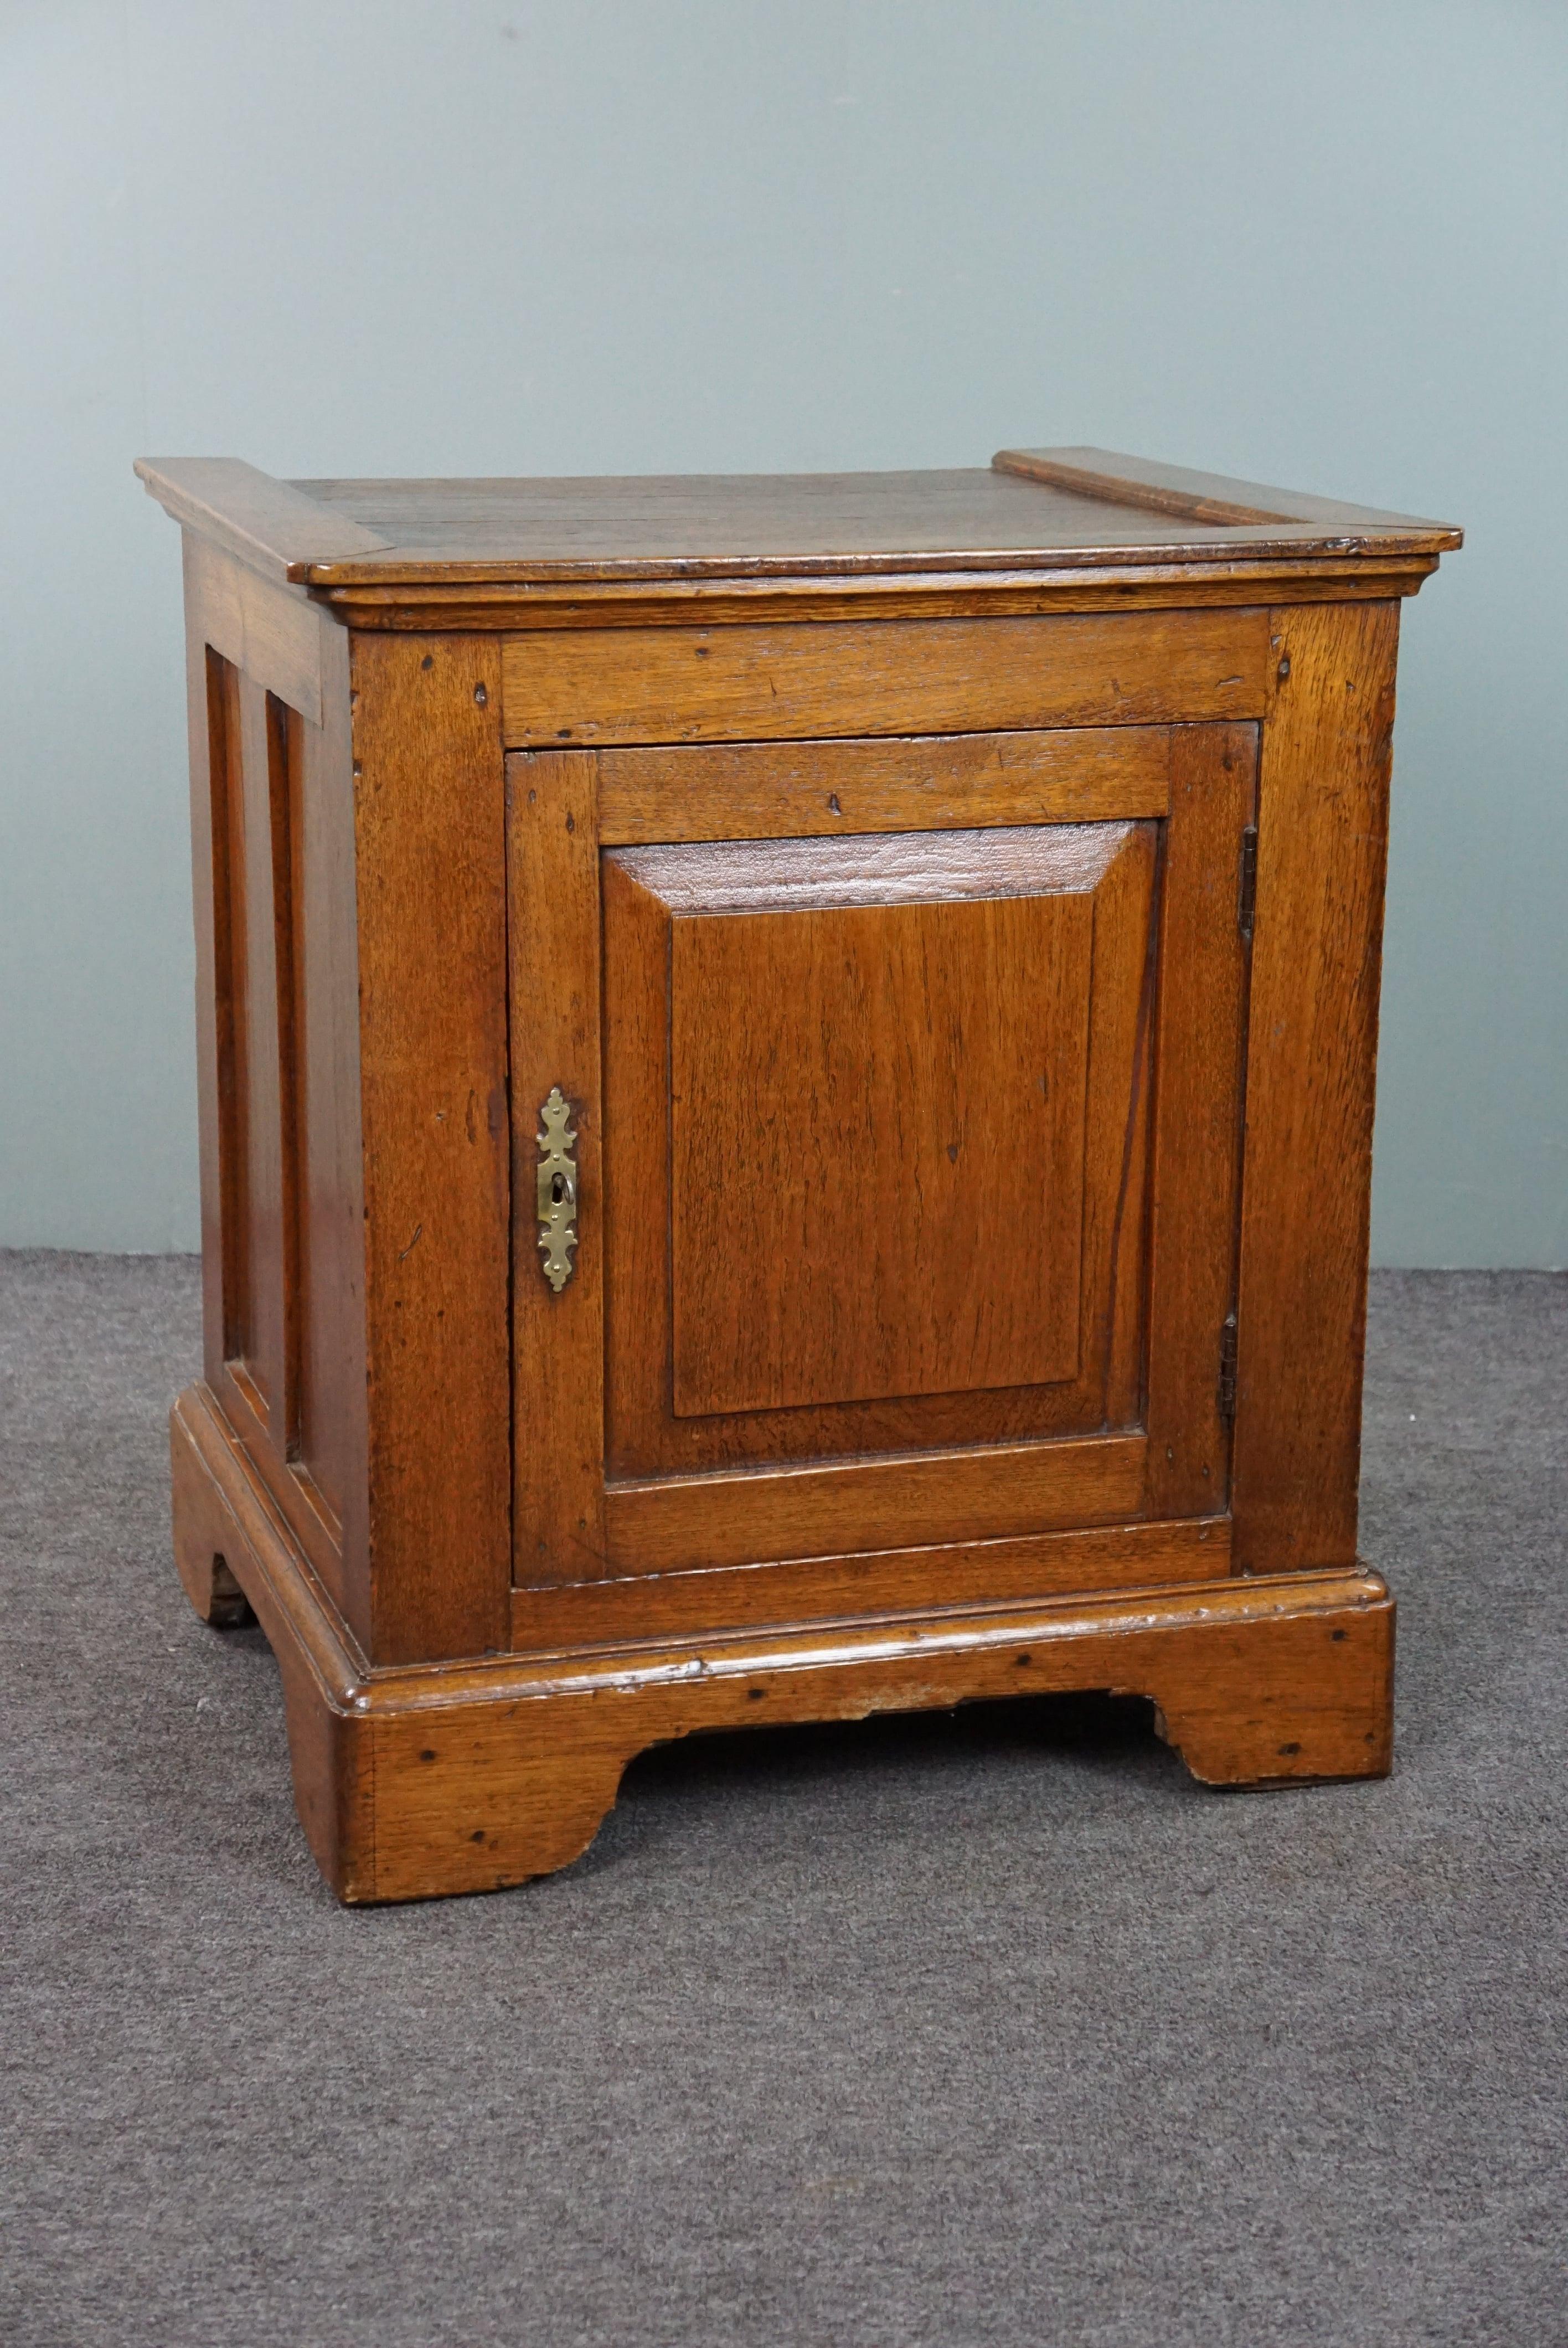 Offered is this beautiful and versatile antique English 1-door cabinet/side table from the mid/late 19th century.

This cabinet immediately shows that antiques are not only beautiful but also versatile. It can be used not only as a cupboard, but